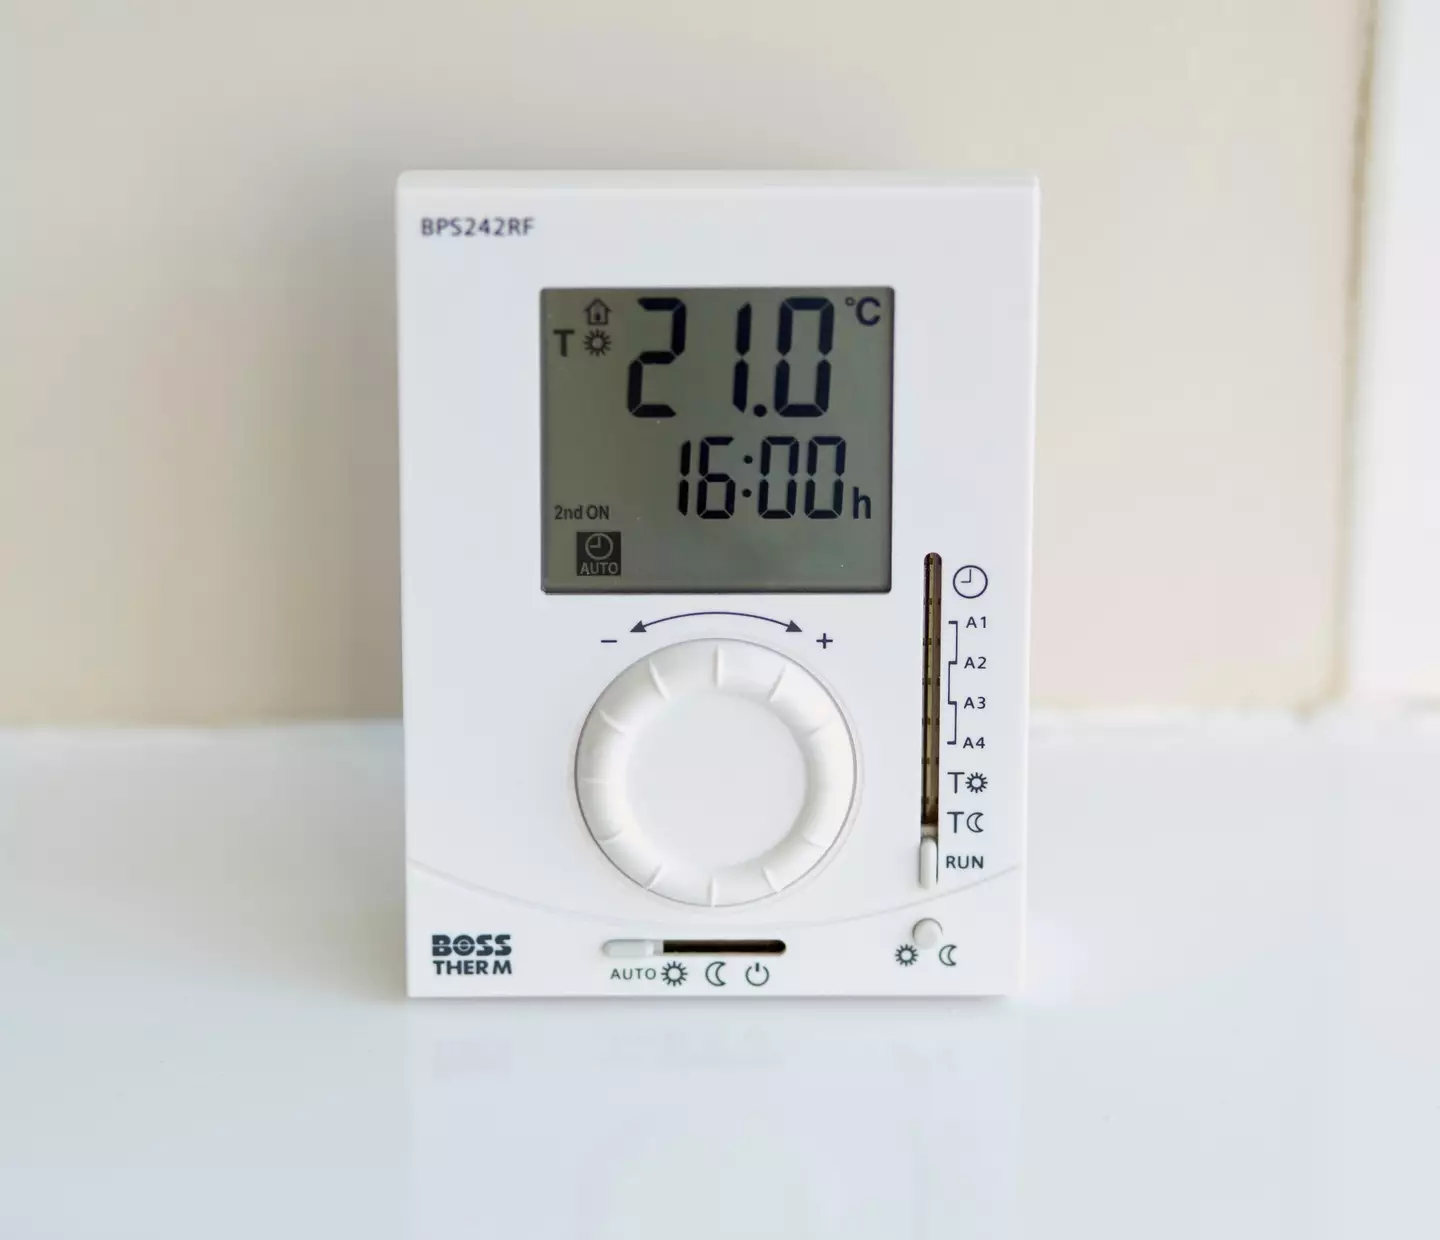 Many Brits will have a tough choice over setting their thermostats this winter.